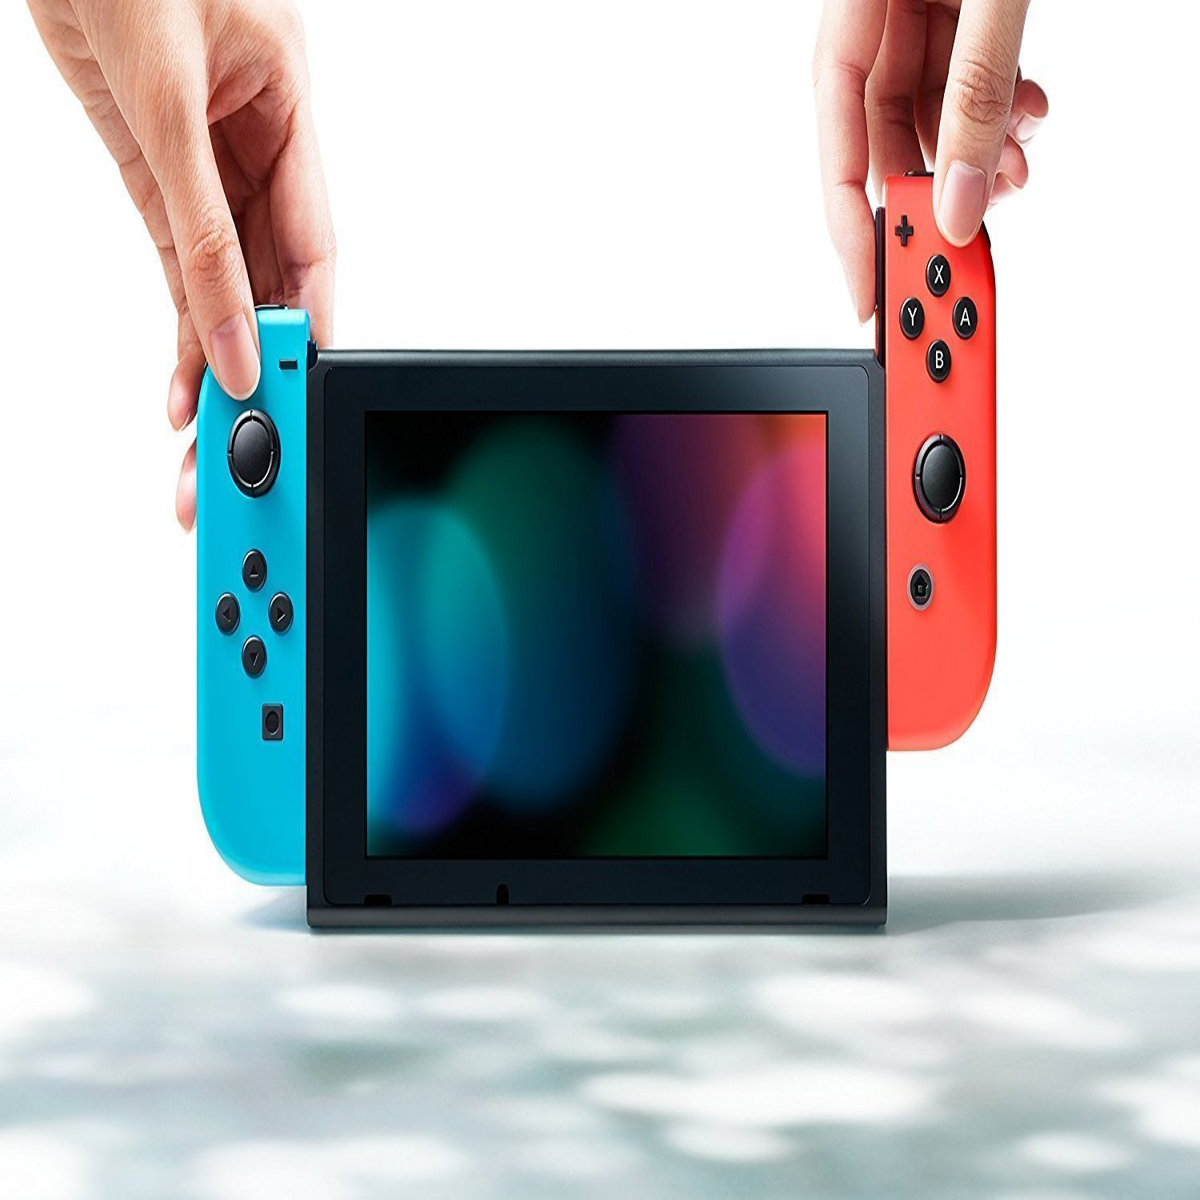 Nintendo lowers price of base Switch model in Europe